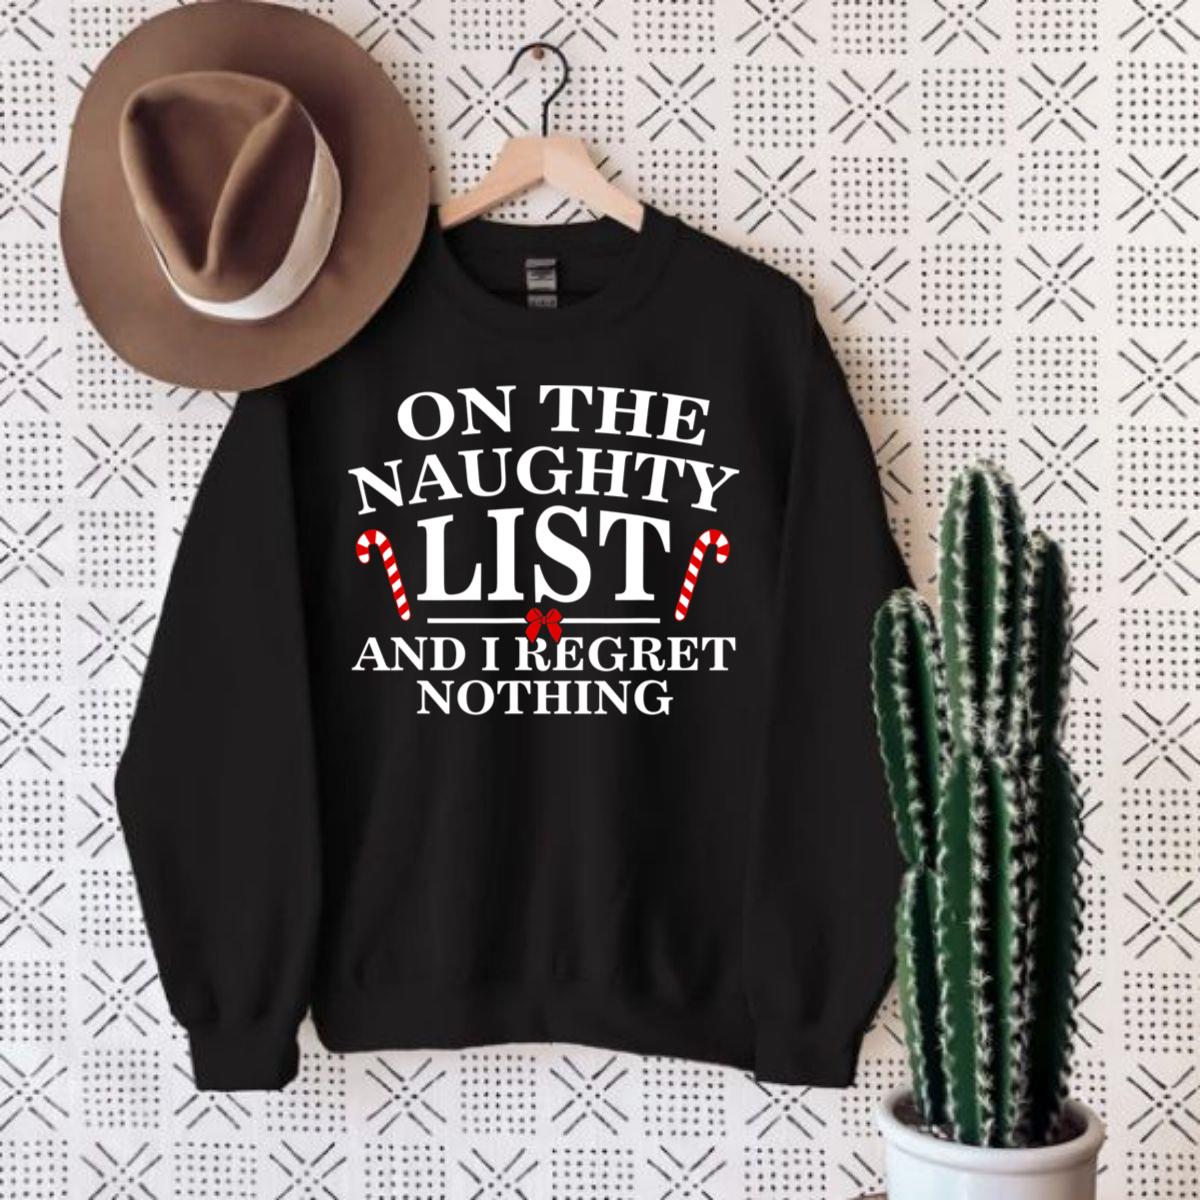 On The Naughty List And I Regret Nothing Funny Xmas Sweatshirt